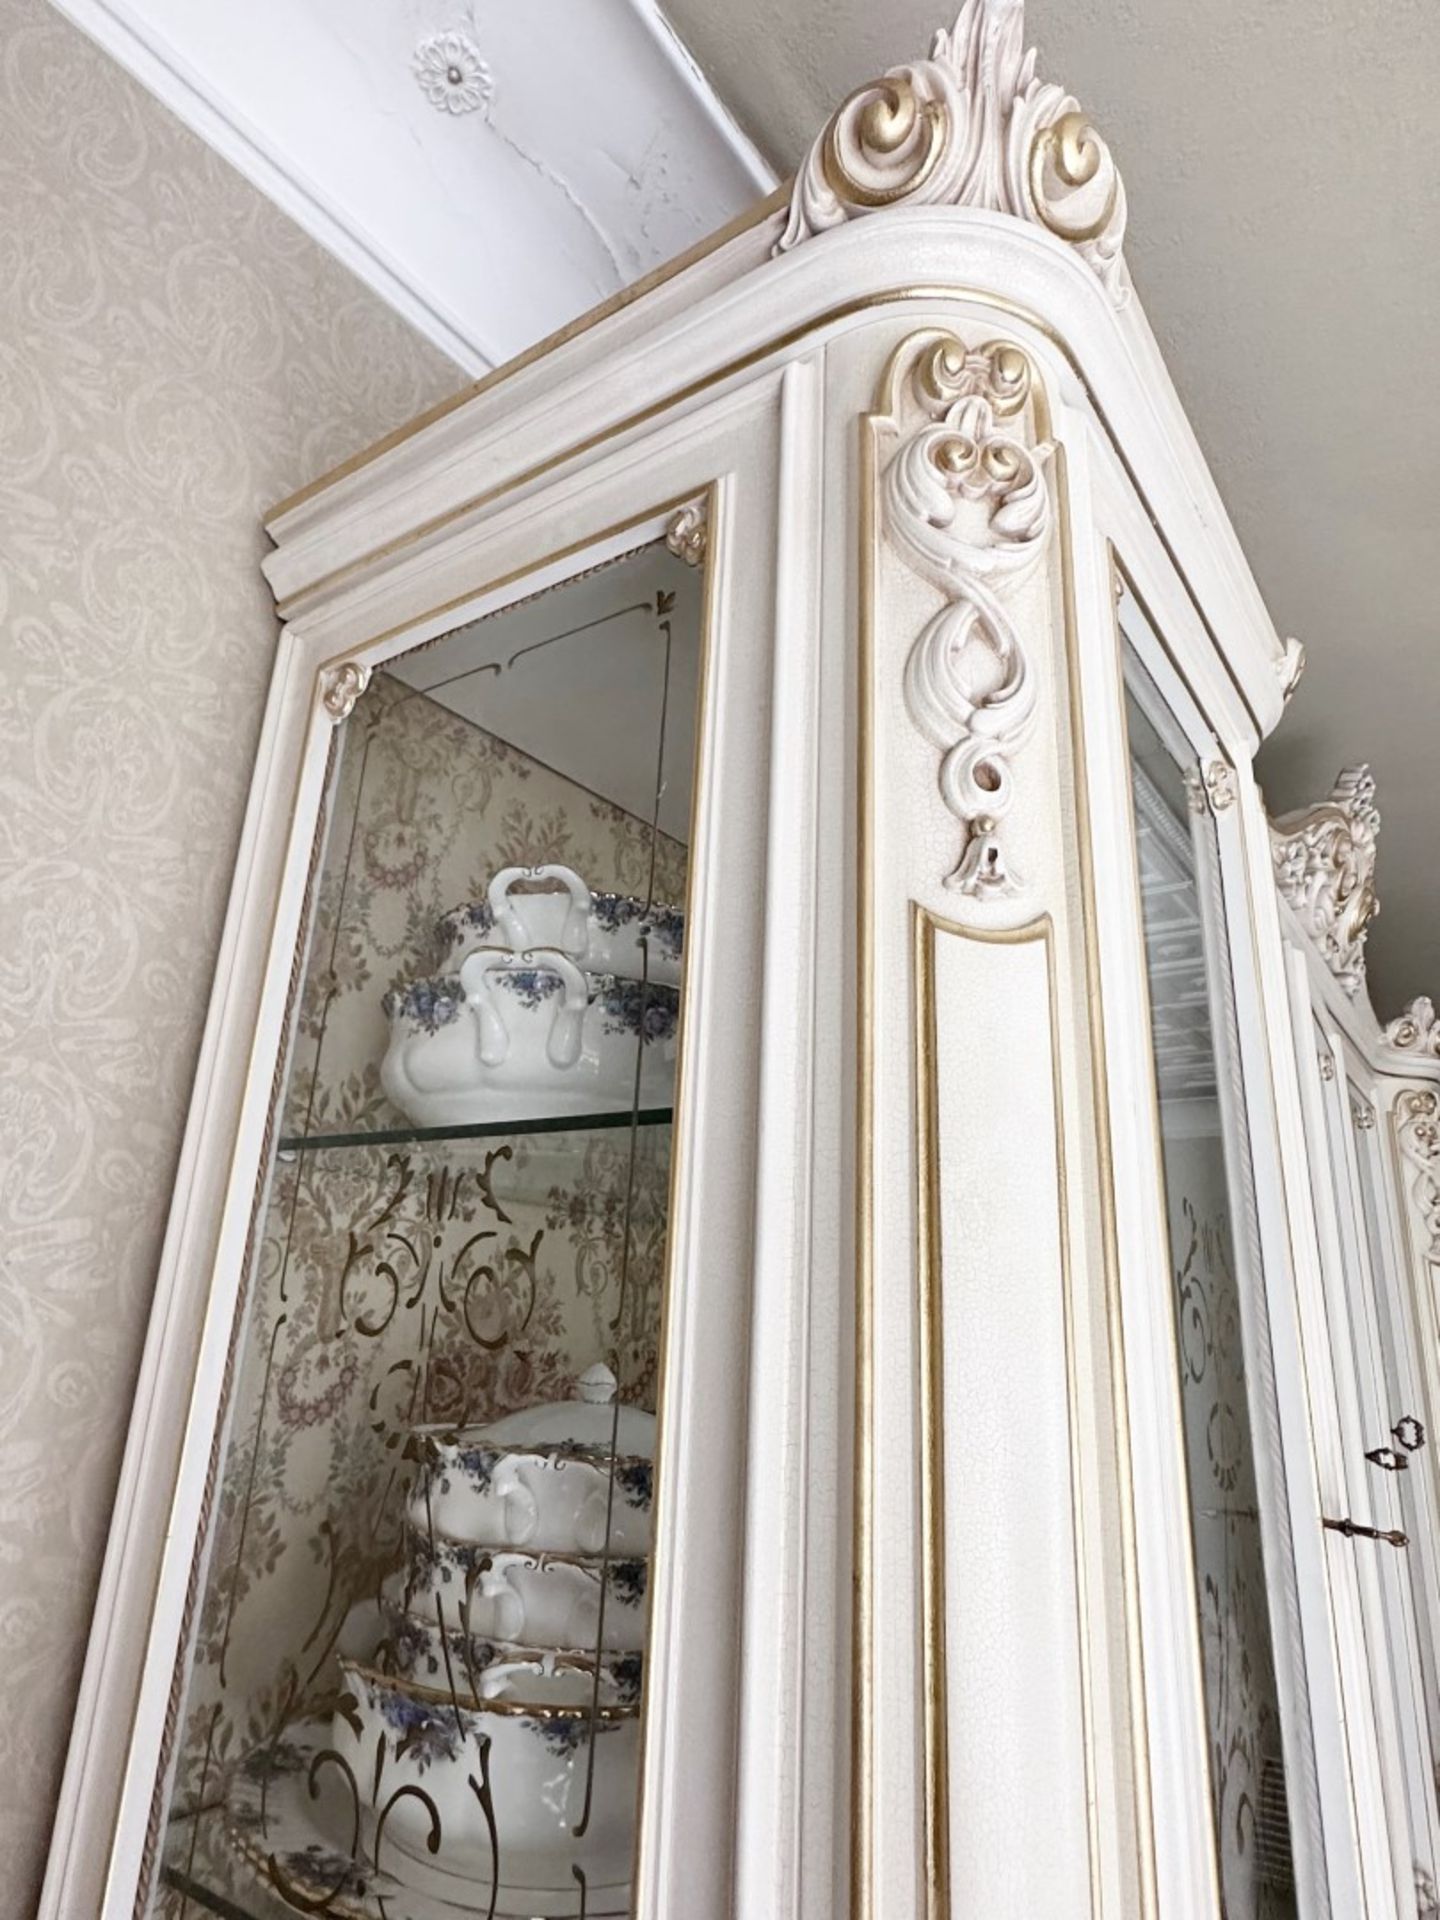 1 x Venetian Style Handcrafted Wood Tall 'Showcase' Display Unit With Glass Lockable Doors - Image 12 of 14